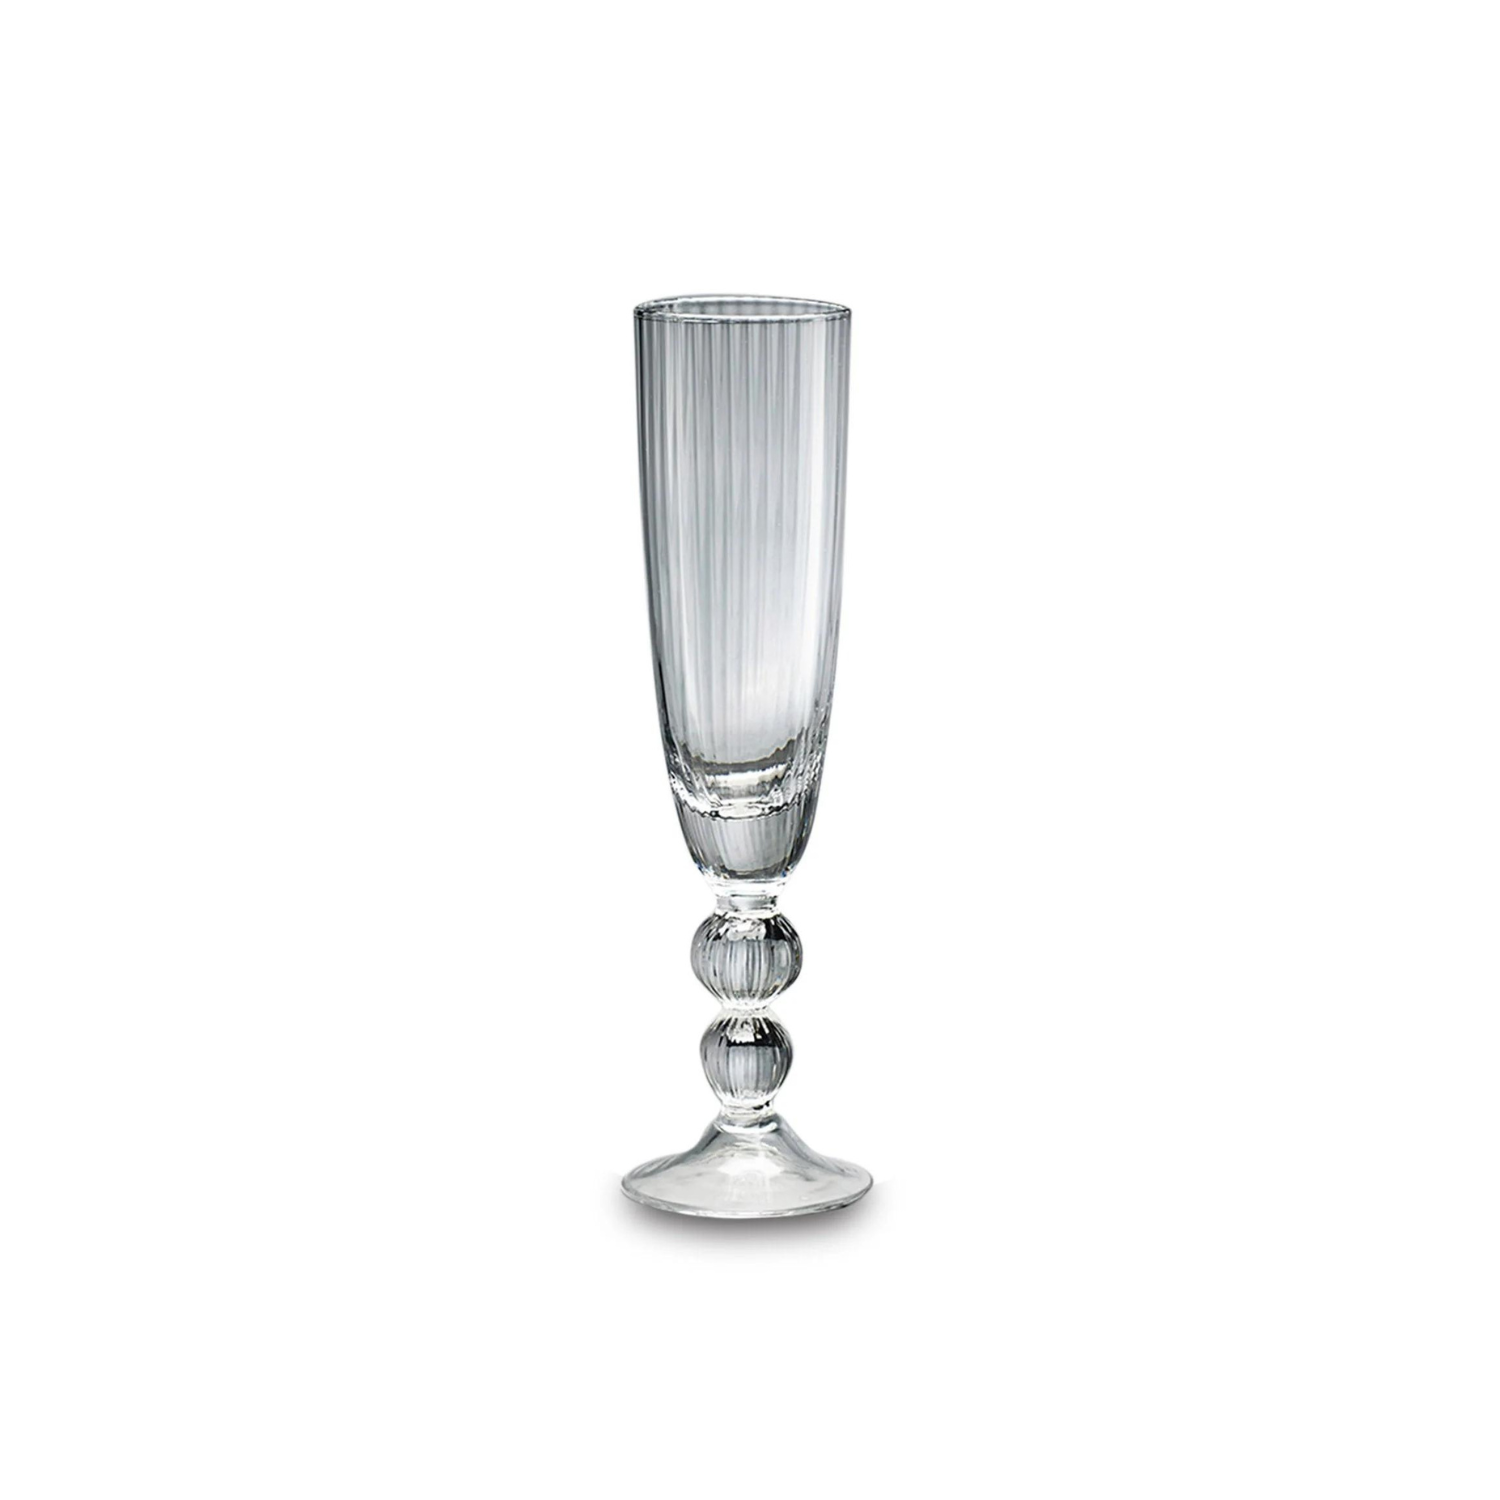 GLASS Venice Champagne Flute Set of 4 (Clear)